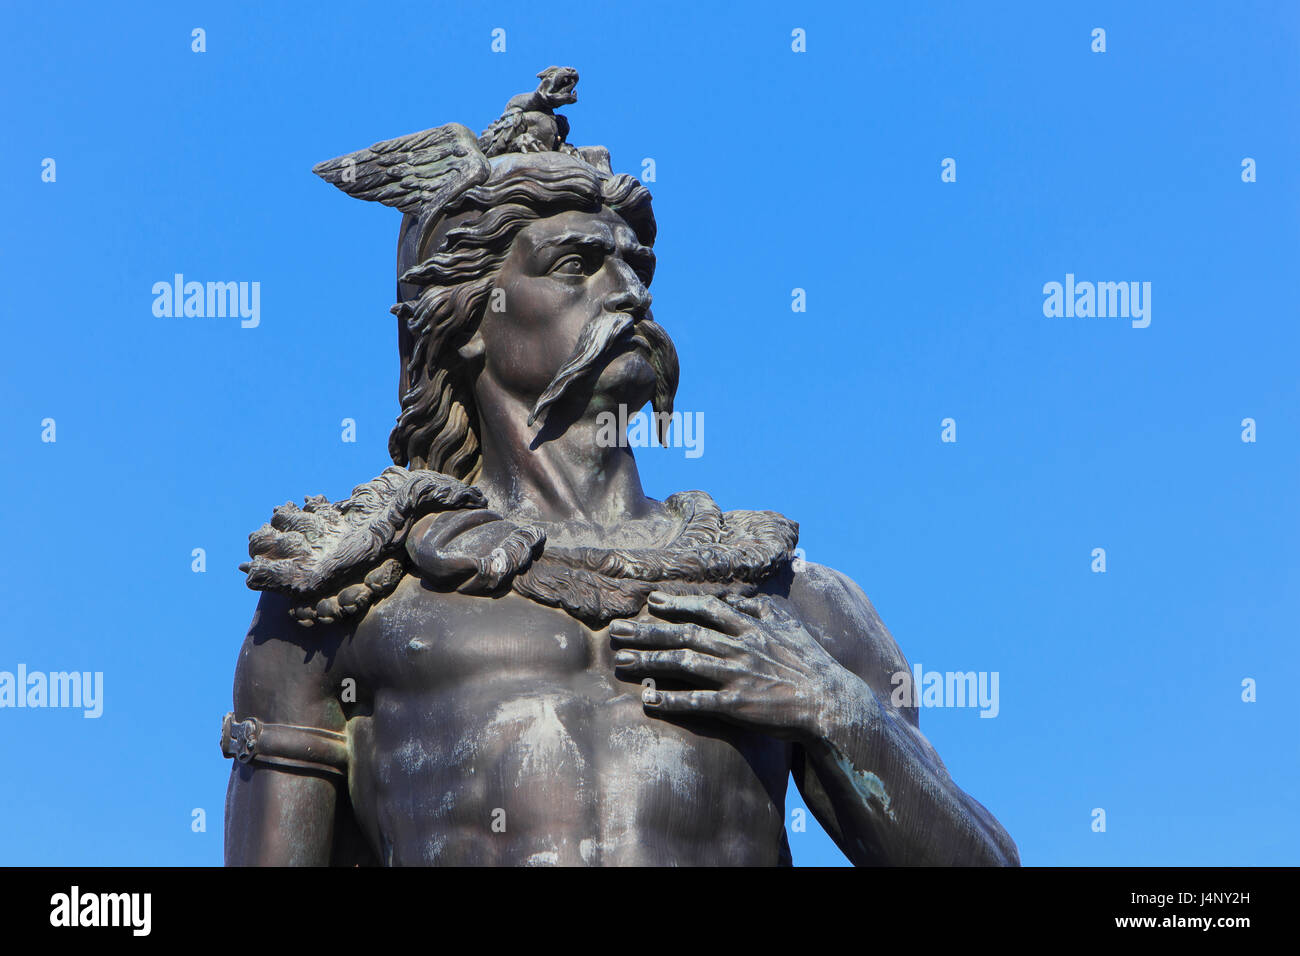 Statue of Ambiorix (prince of the Eburones, leader of the Belgic tribe) at the Market Square in Tongeren, Belgium Stock Photo